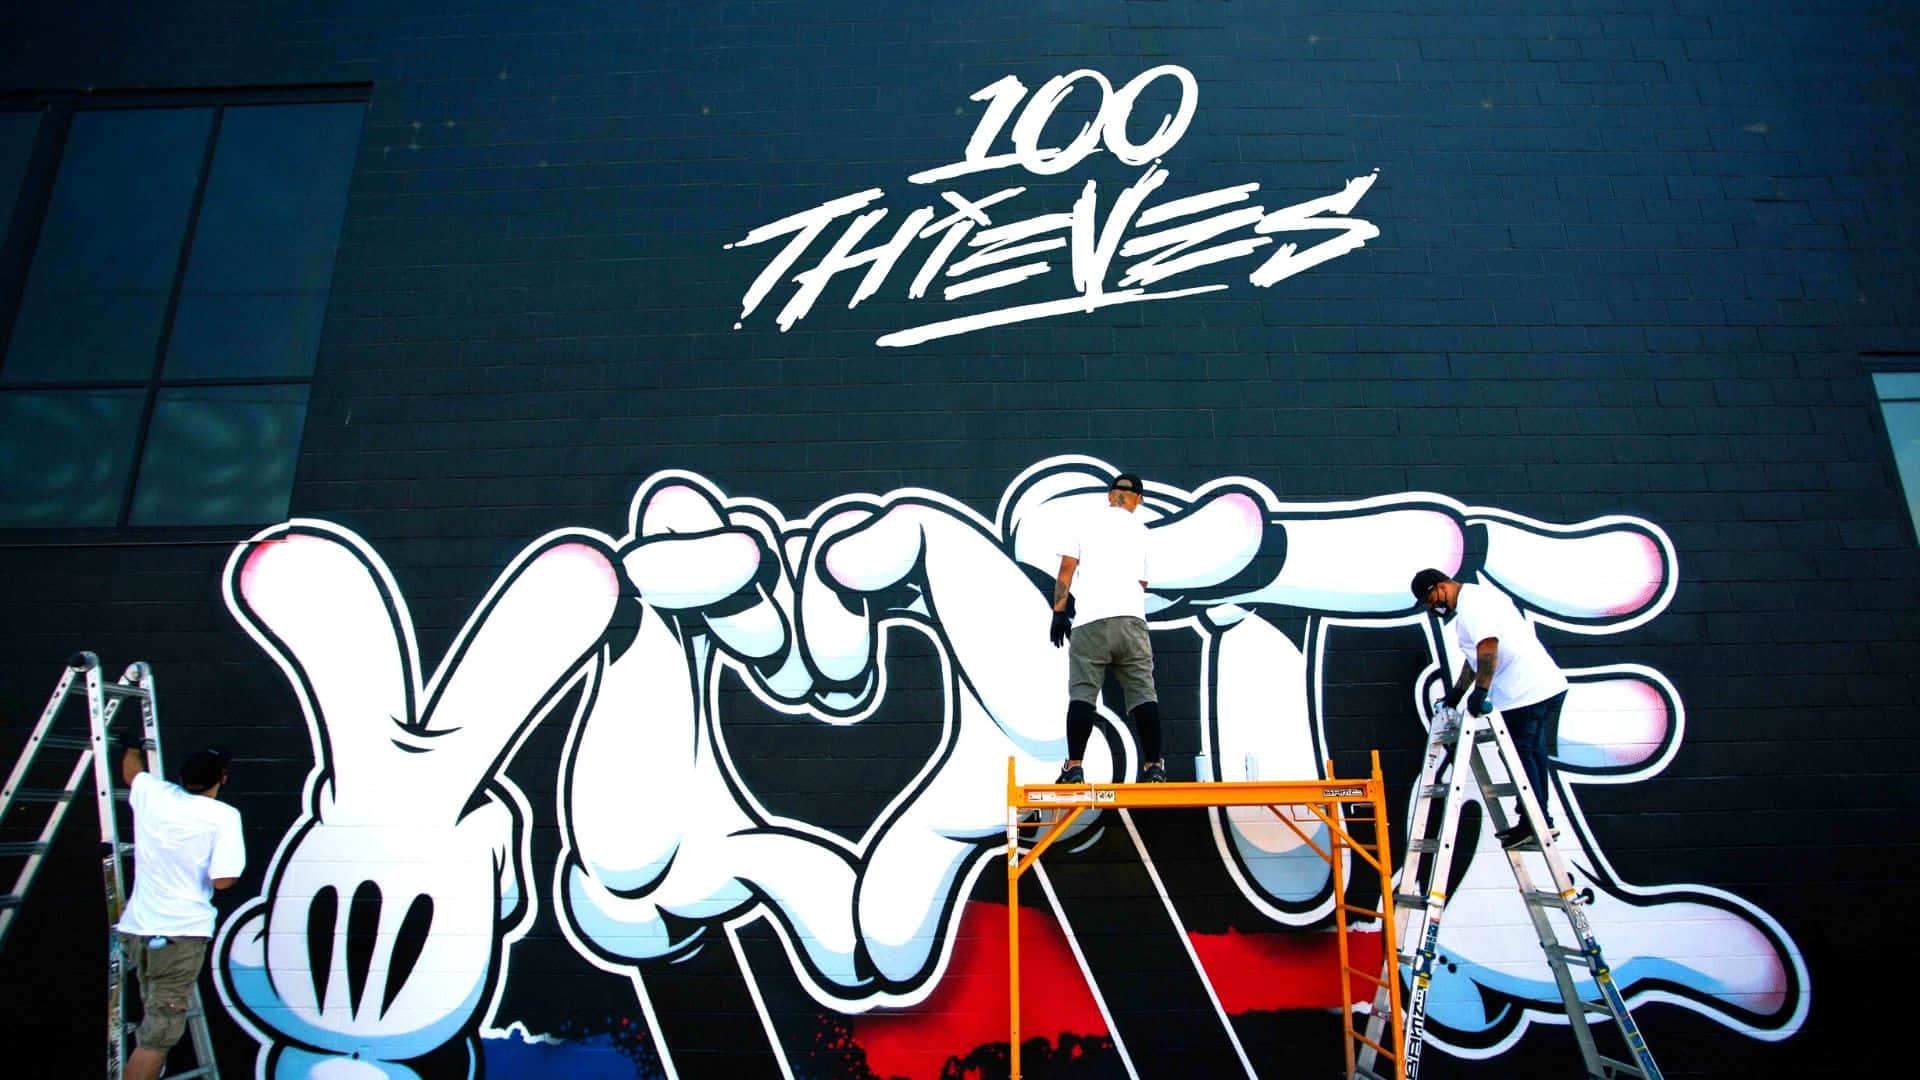 Download 100 Thieves Hq As A Voting Center Wallpaper | Wallpapers.com